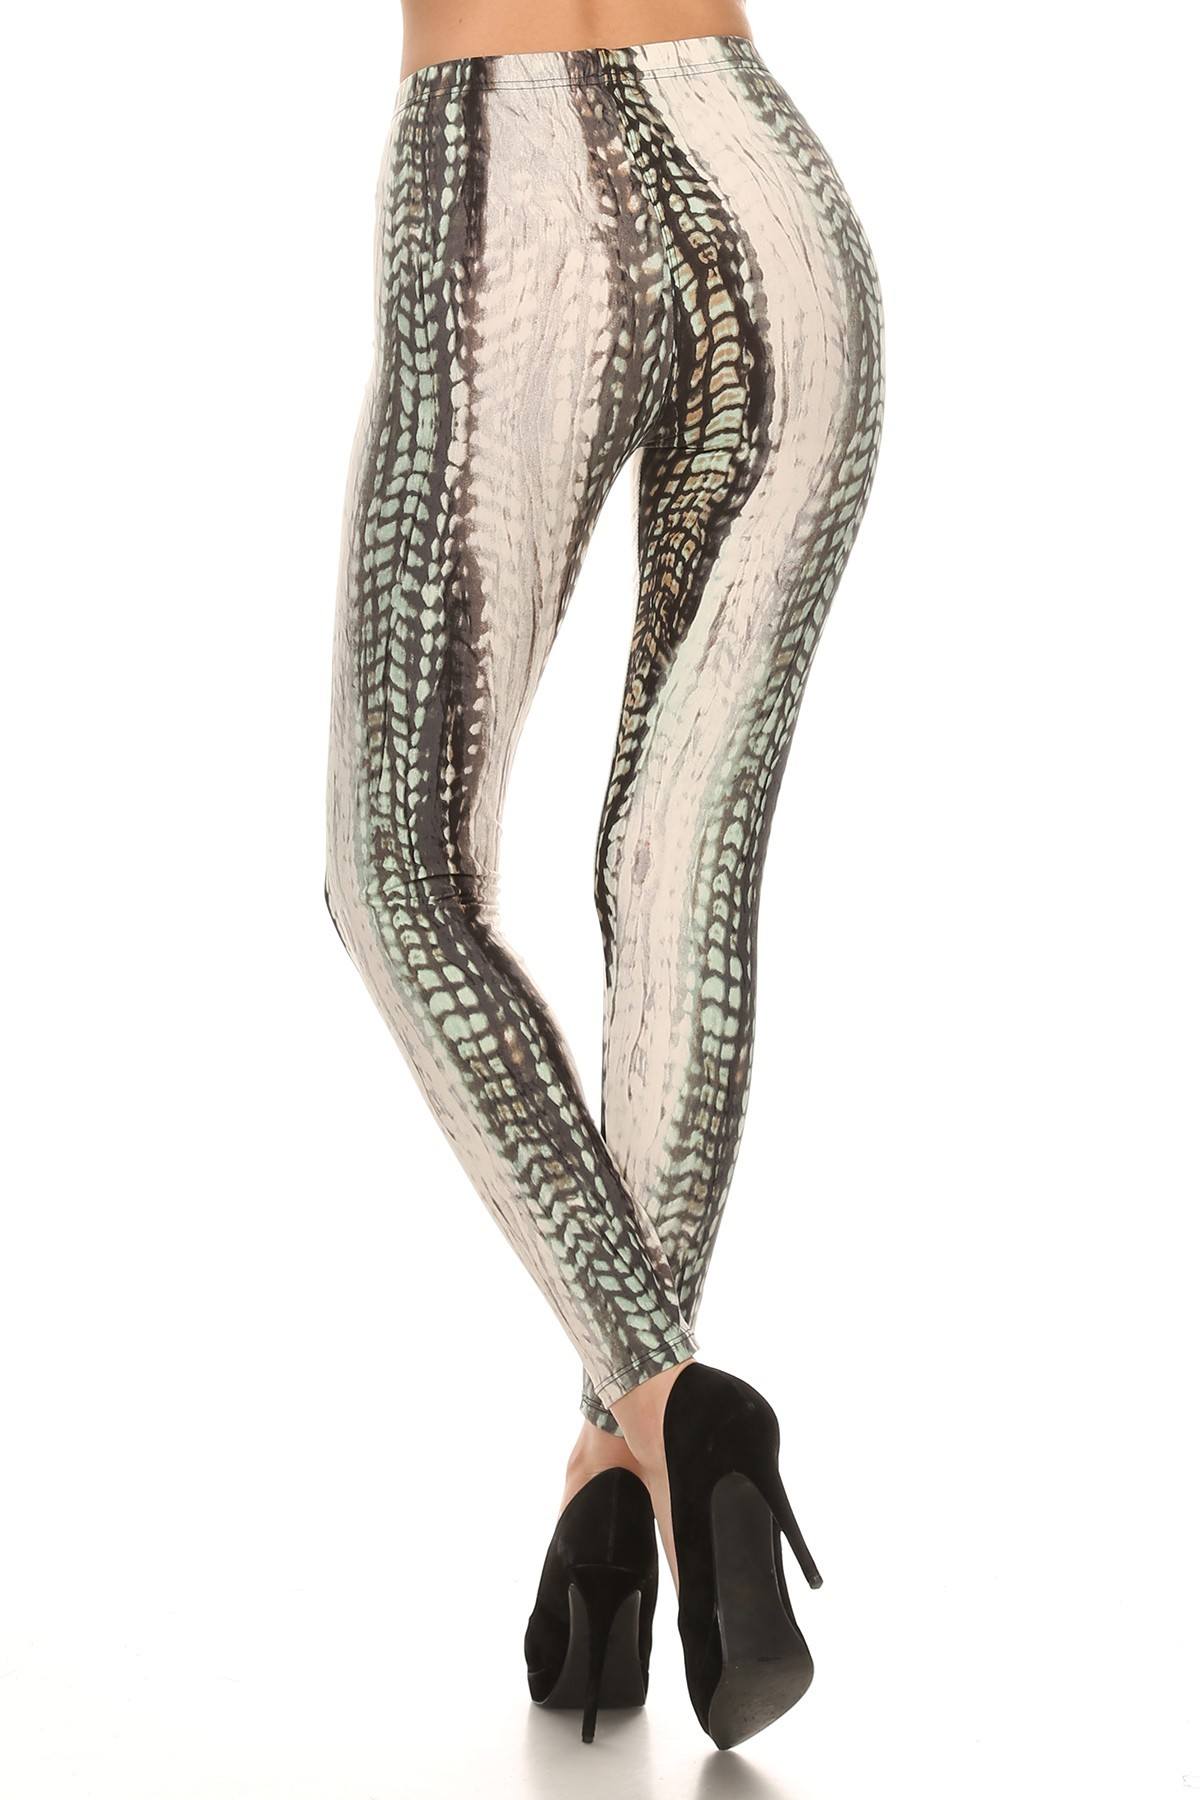 Snake Scales Printed, High Waisted Leggings In Fitted Style With Elastic Waistband king-general-store-5710.myshopify.com